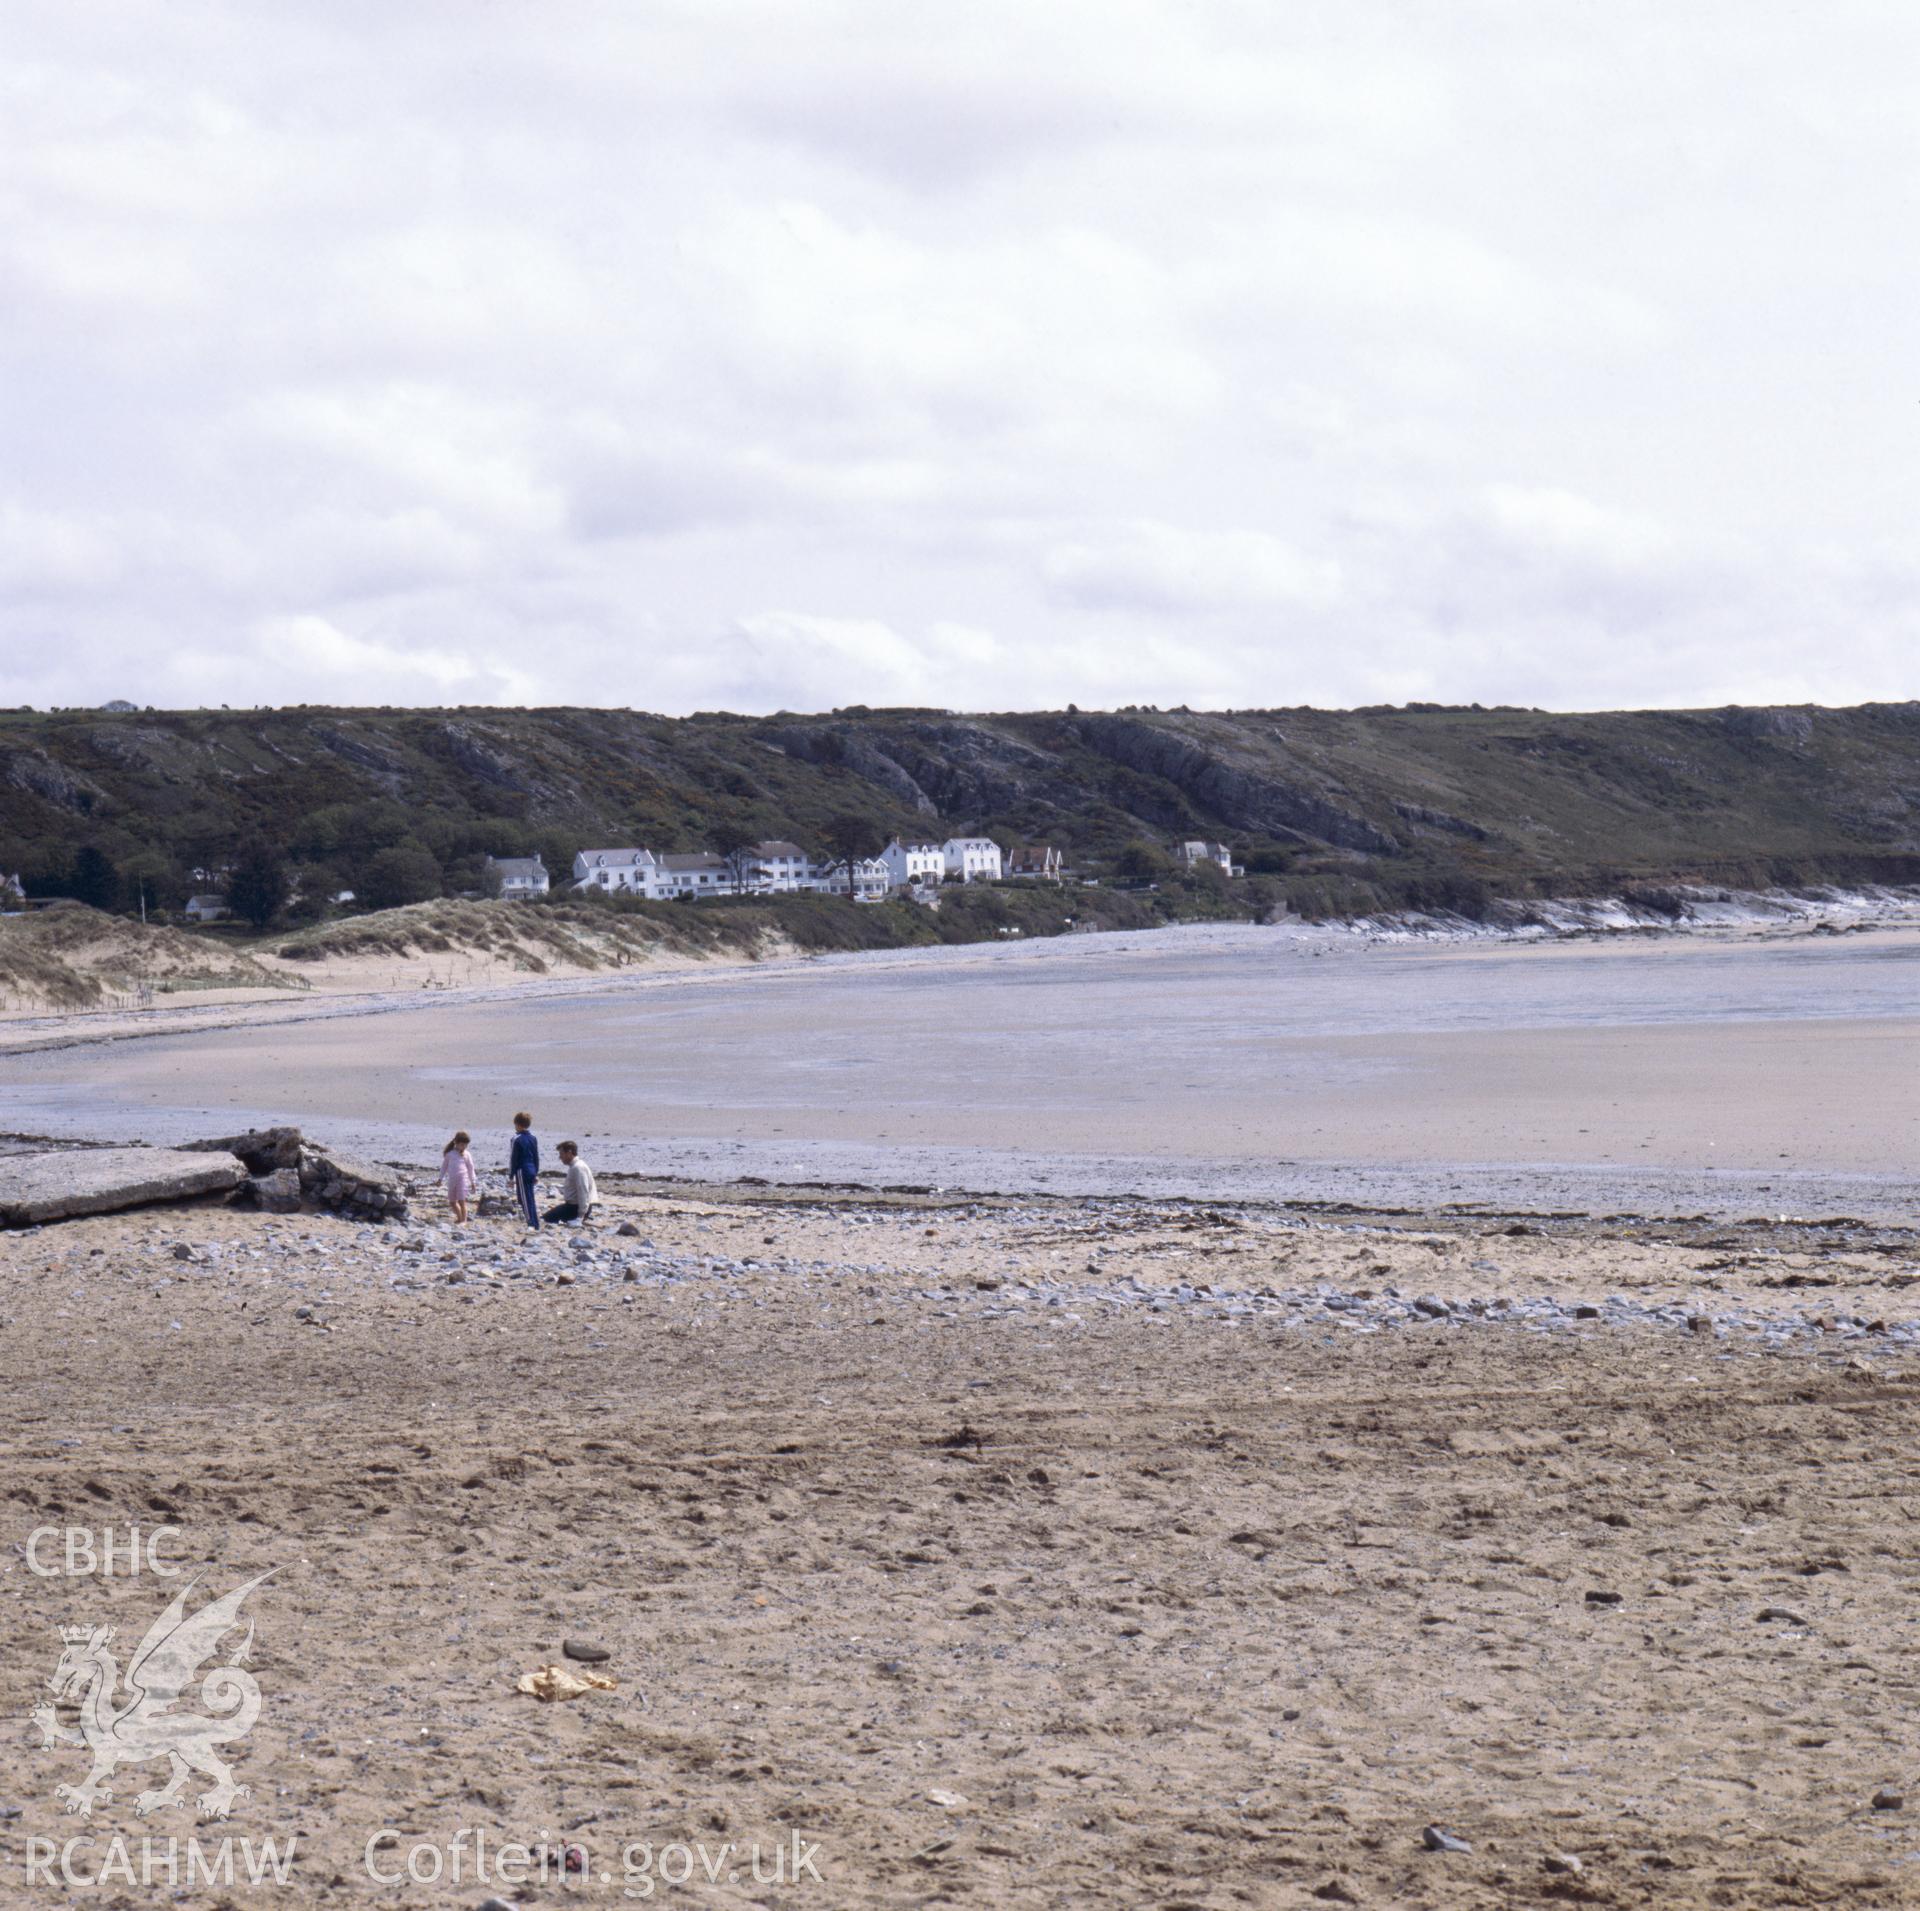 1 colour transparency showing view of the beach near Weobley castle; collated by the former Central Office of Information.